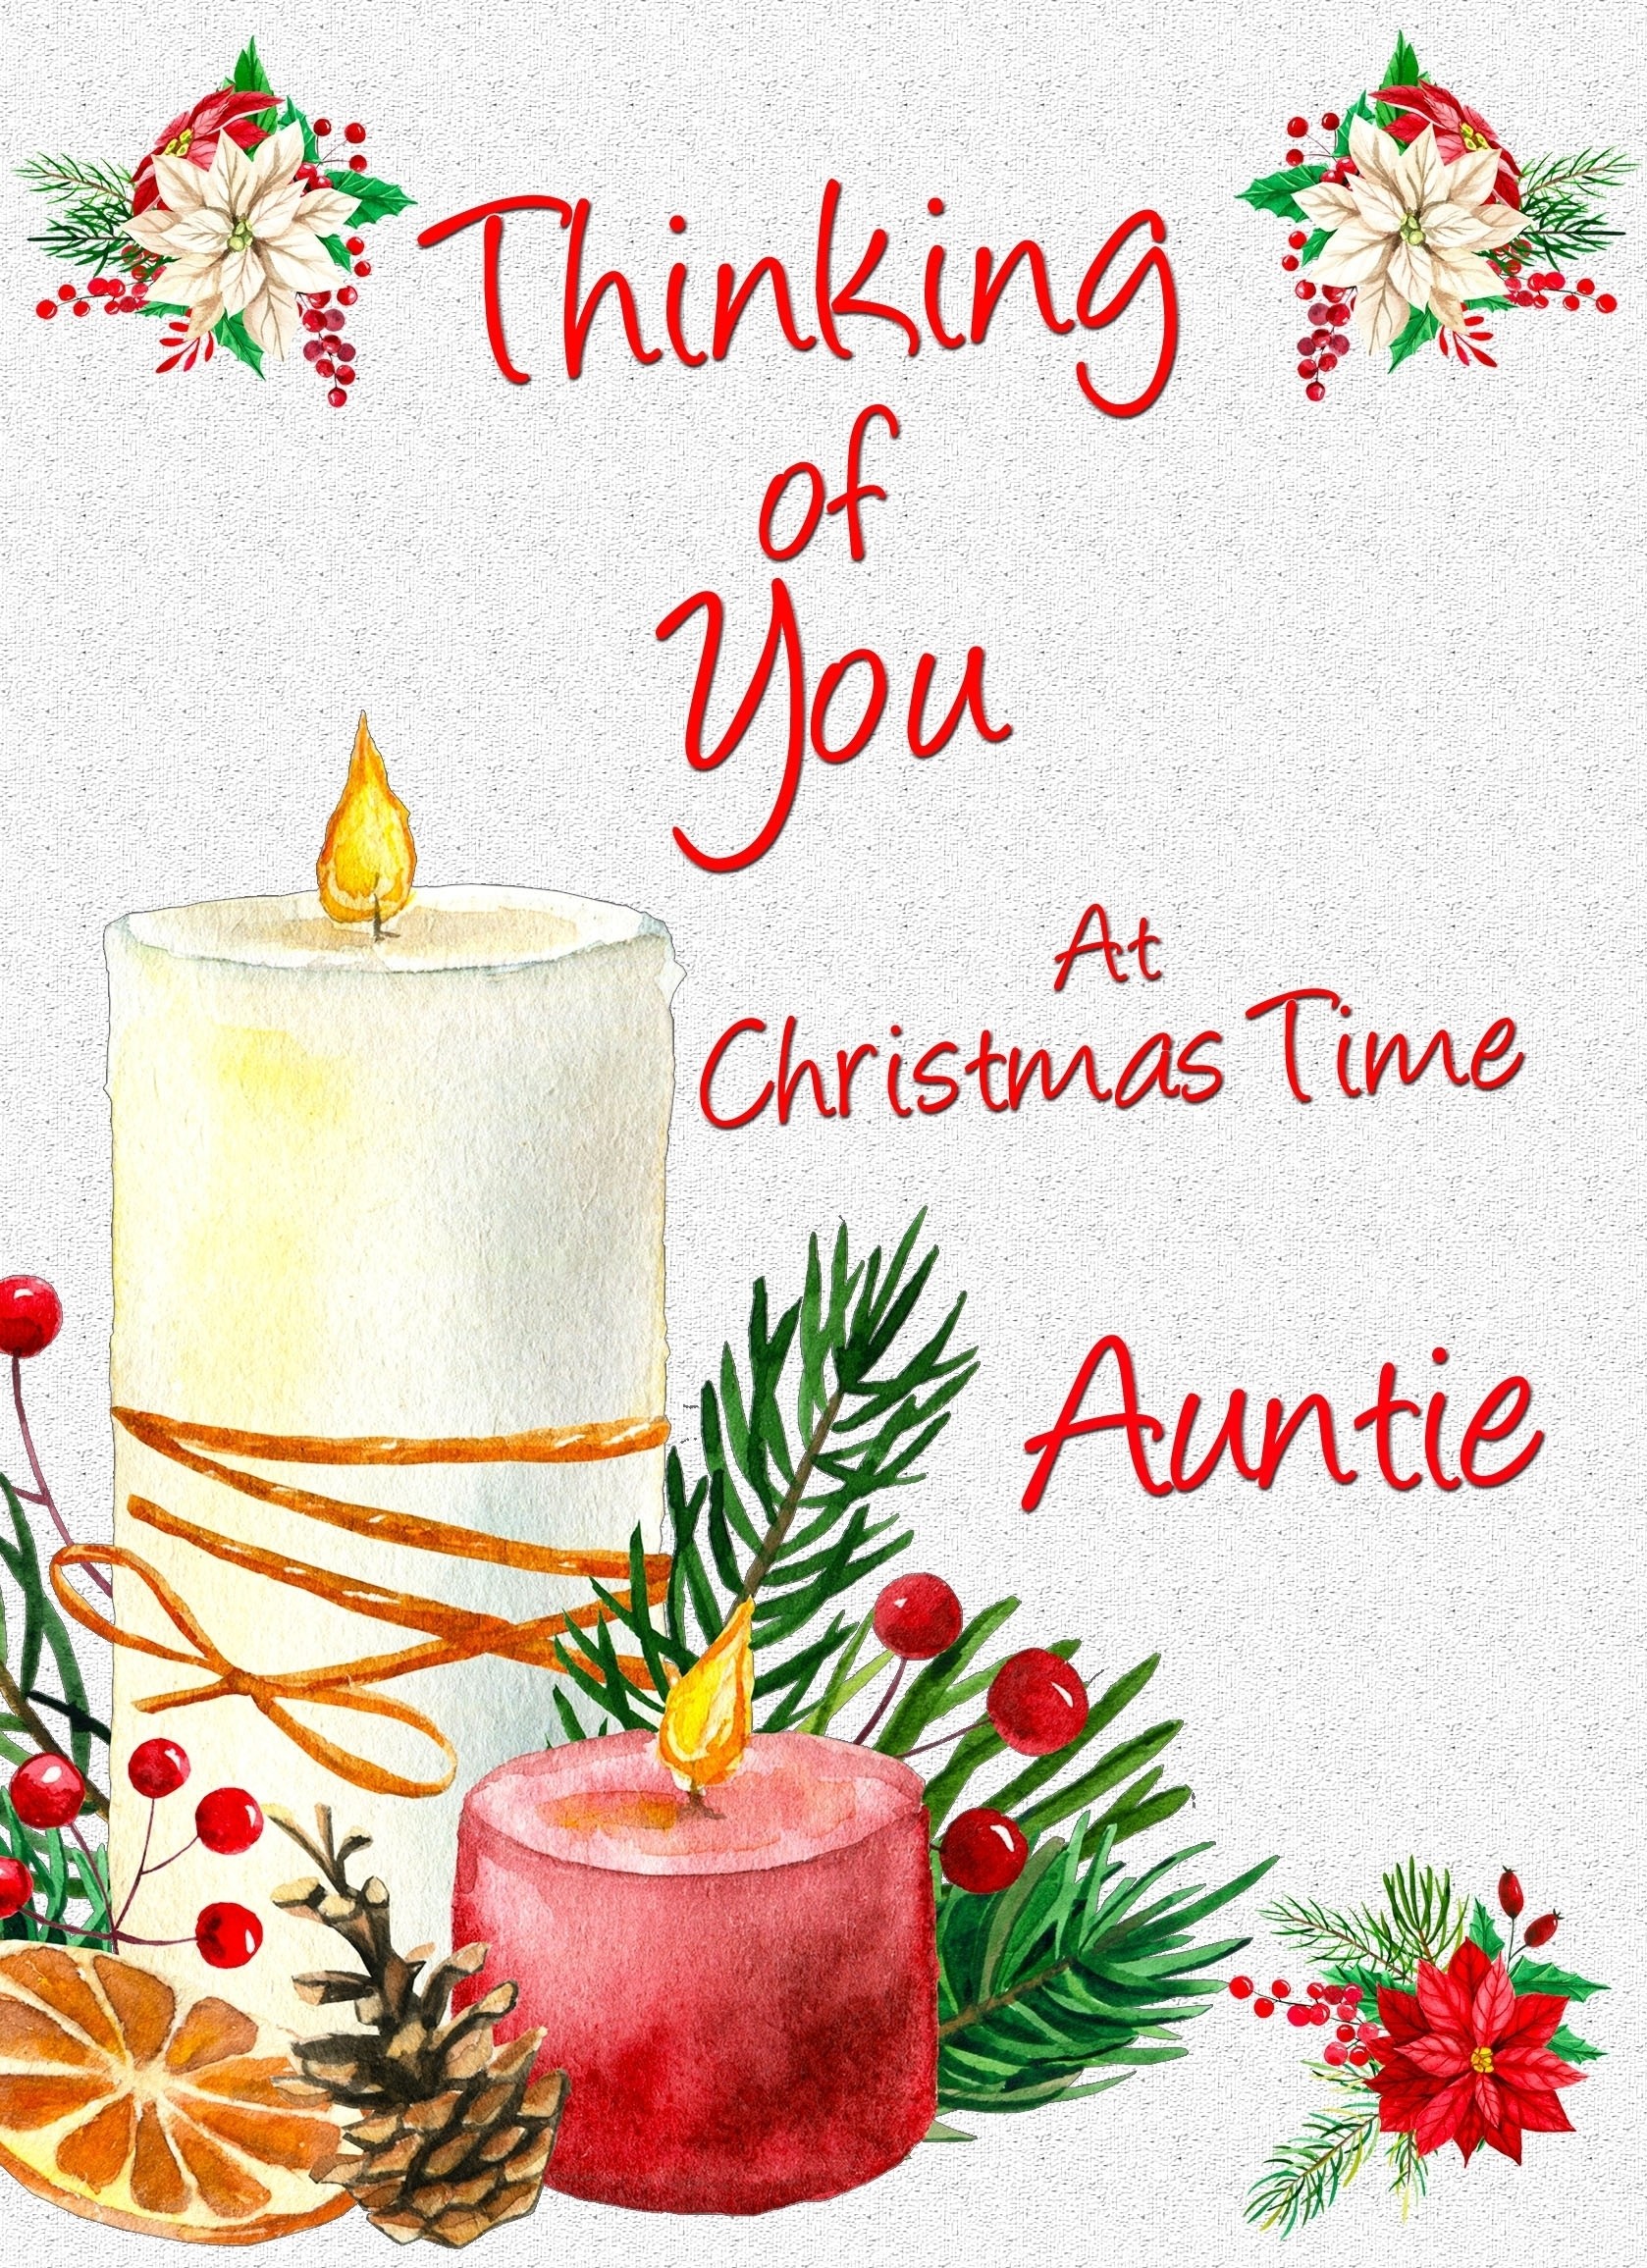 Thinking of You at Christmas Card For Auntie (Candle)